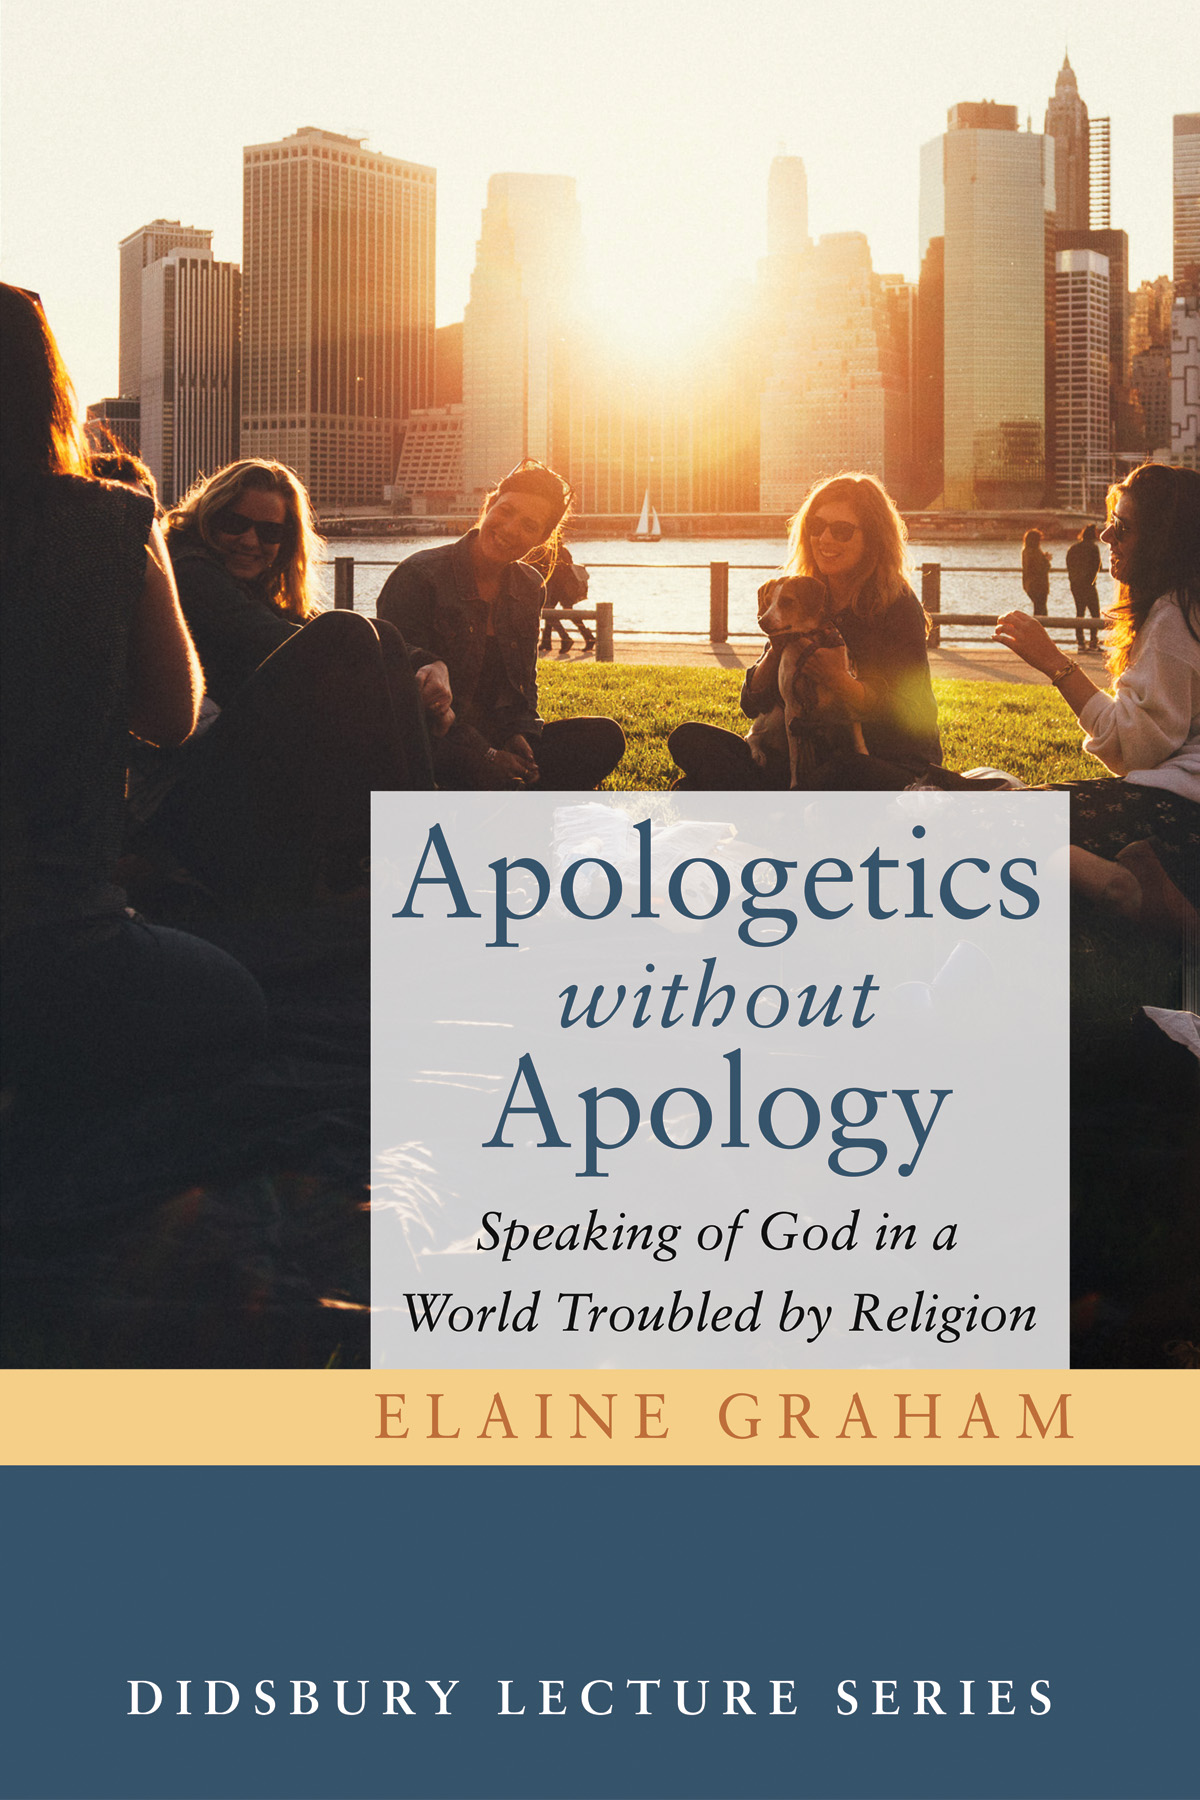 Apologetics without Apology  Speaking of God in a World Troubled by Religion